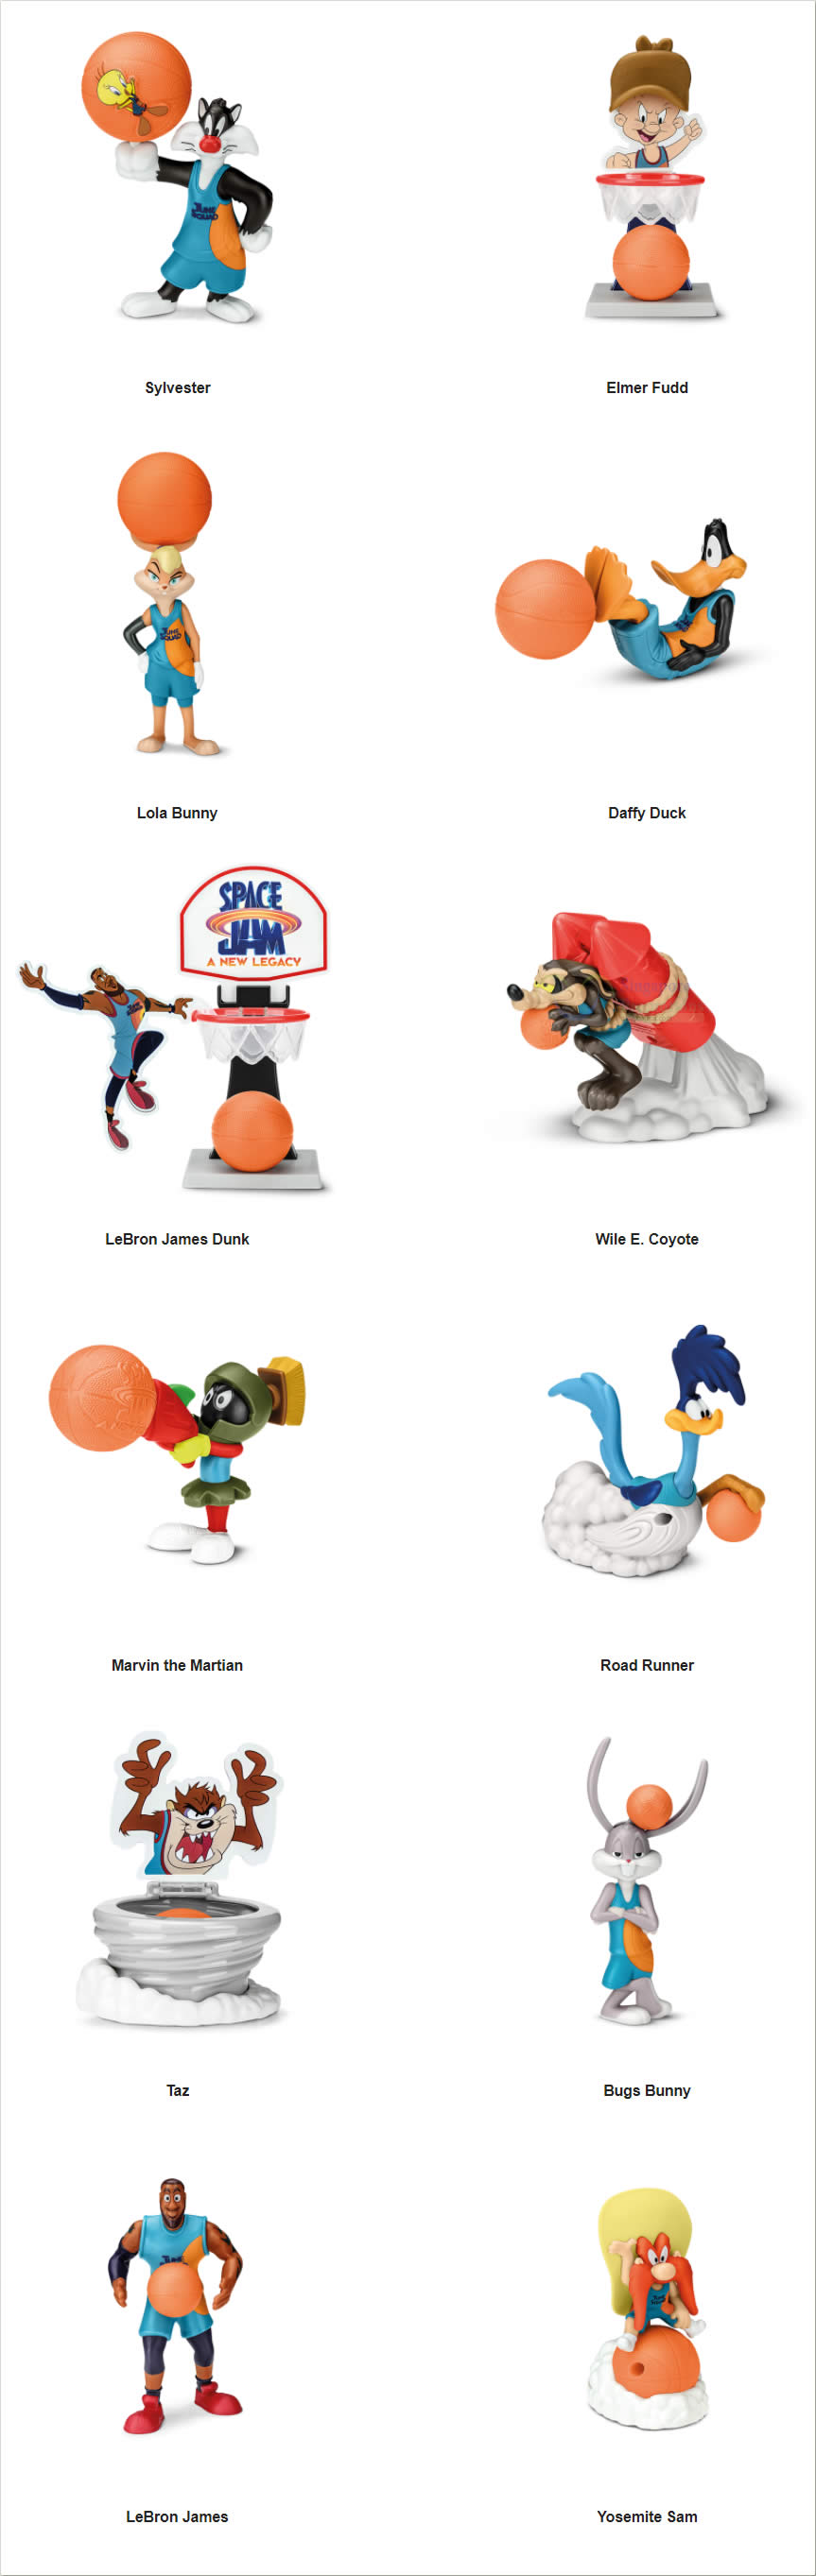 2021 McDONALD'S Space Jam New Legacy Lebron HAPPY MEAL TOYS Coyote 